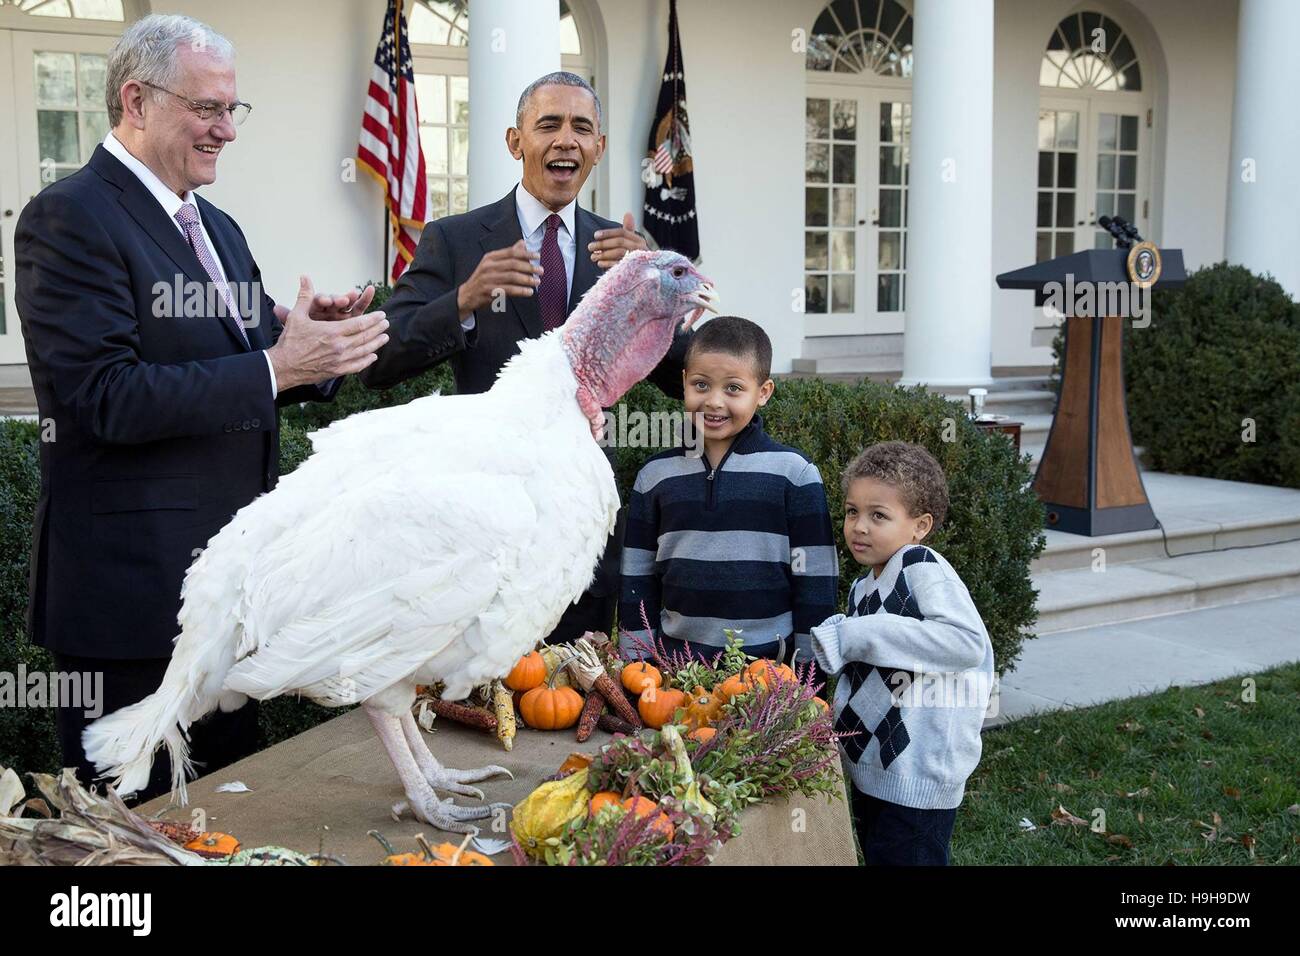 Washington DC, USA. 23rd November, 2016. U.S President Barack Obama with his nephews Aaron Robinson and Austin Robinson, and National Turkey Federation Chairman John Reicks during the annual Turkey presentation in the Rose Garden of the White House November 23, 2016 in Washington, DC. President Obama pardoned turkeys named Tater and Tot for the last time as he prepares to leave office after 8-years. Credit:  Planetpix/Alamy Live News Stock Photo